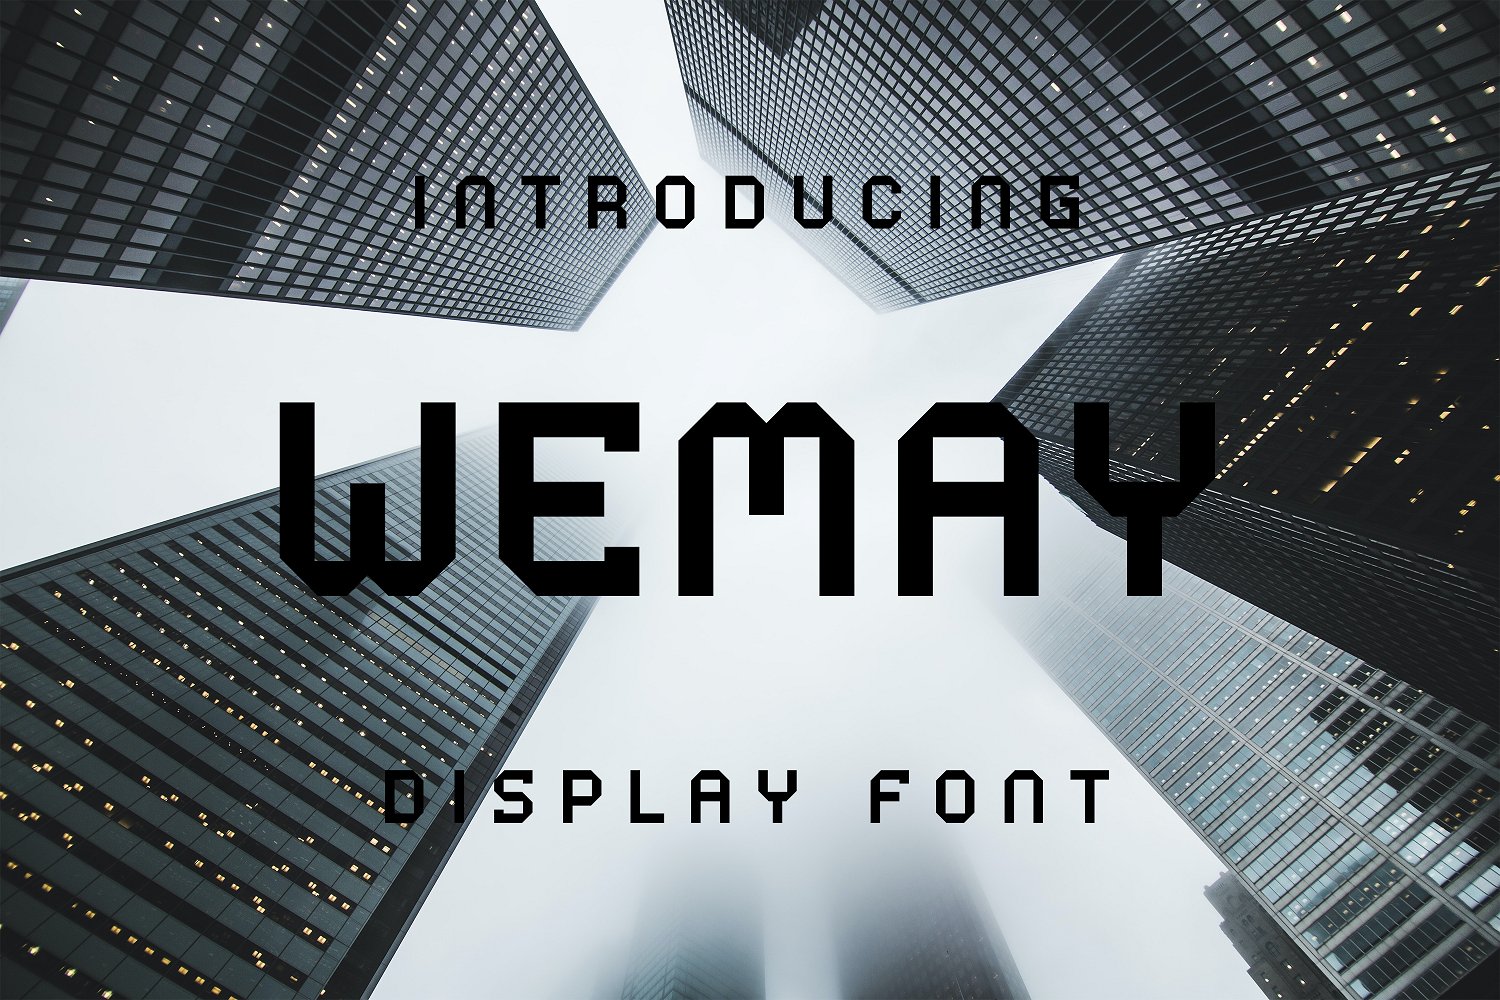 Wemaypreview image.